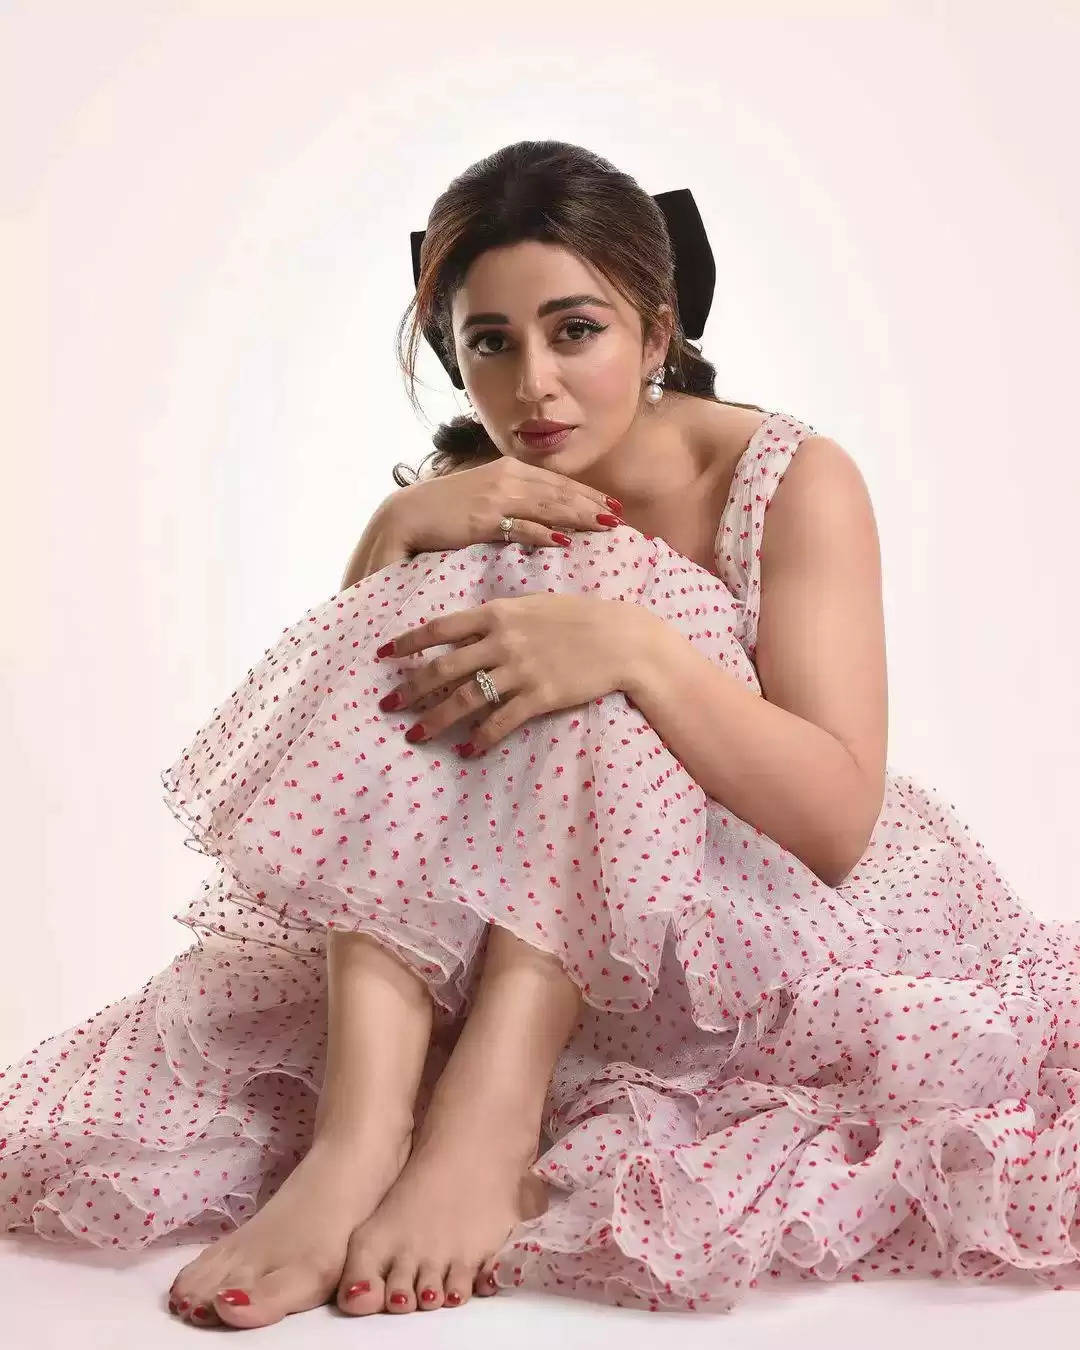 Nehha Pendse gives fashion inspiration! Check out her 5 glamorous western outfits